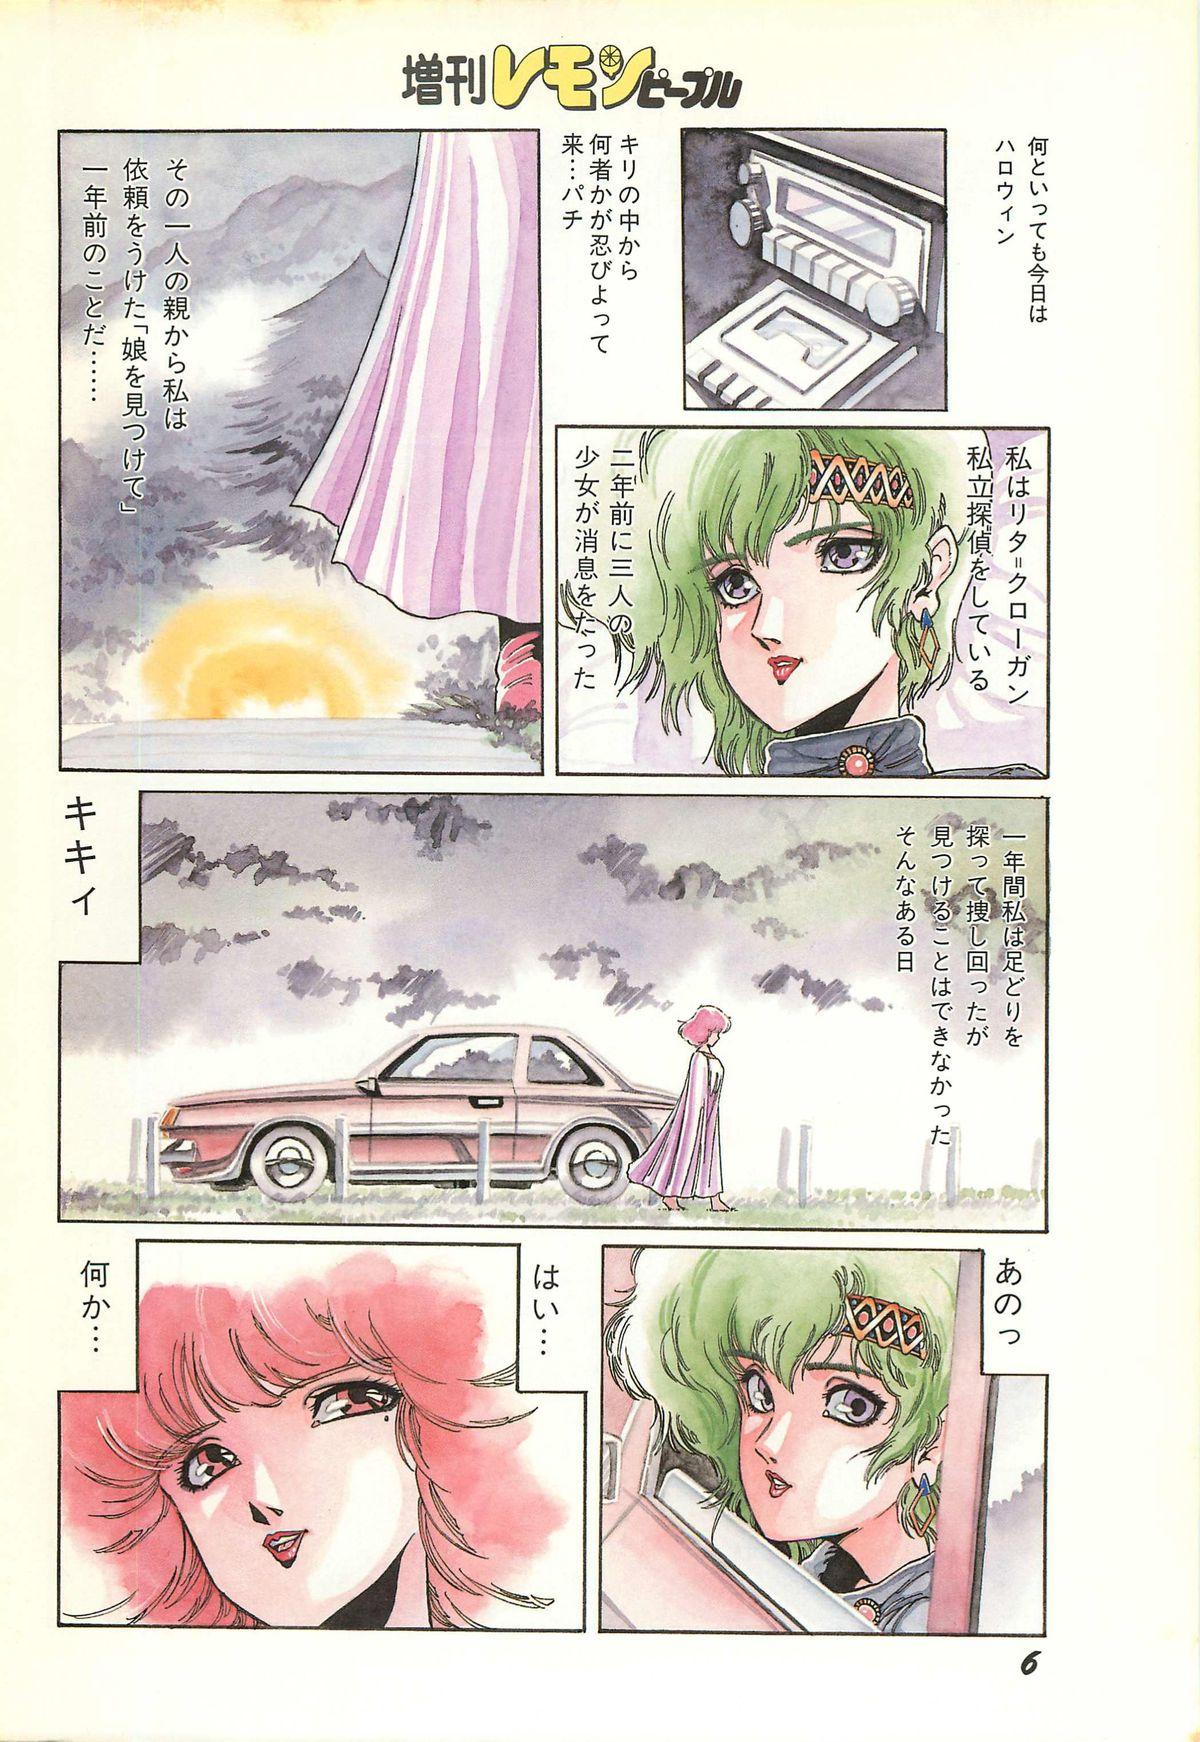 Workout Lemon People 1986-11 Zoukangou Vol. 65 All Color Breasts - Page 8